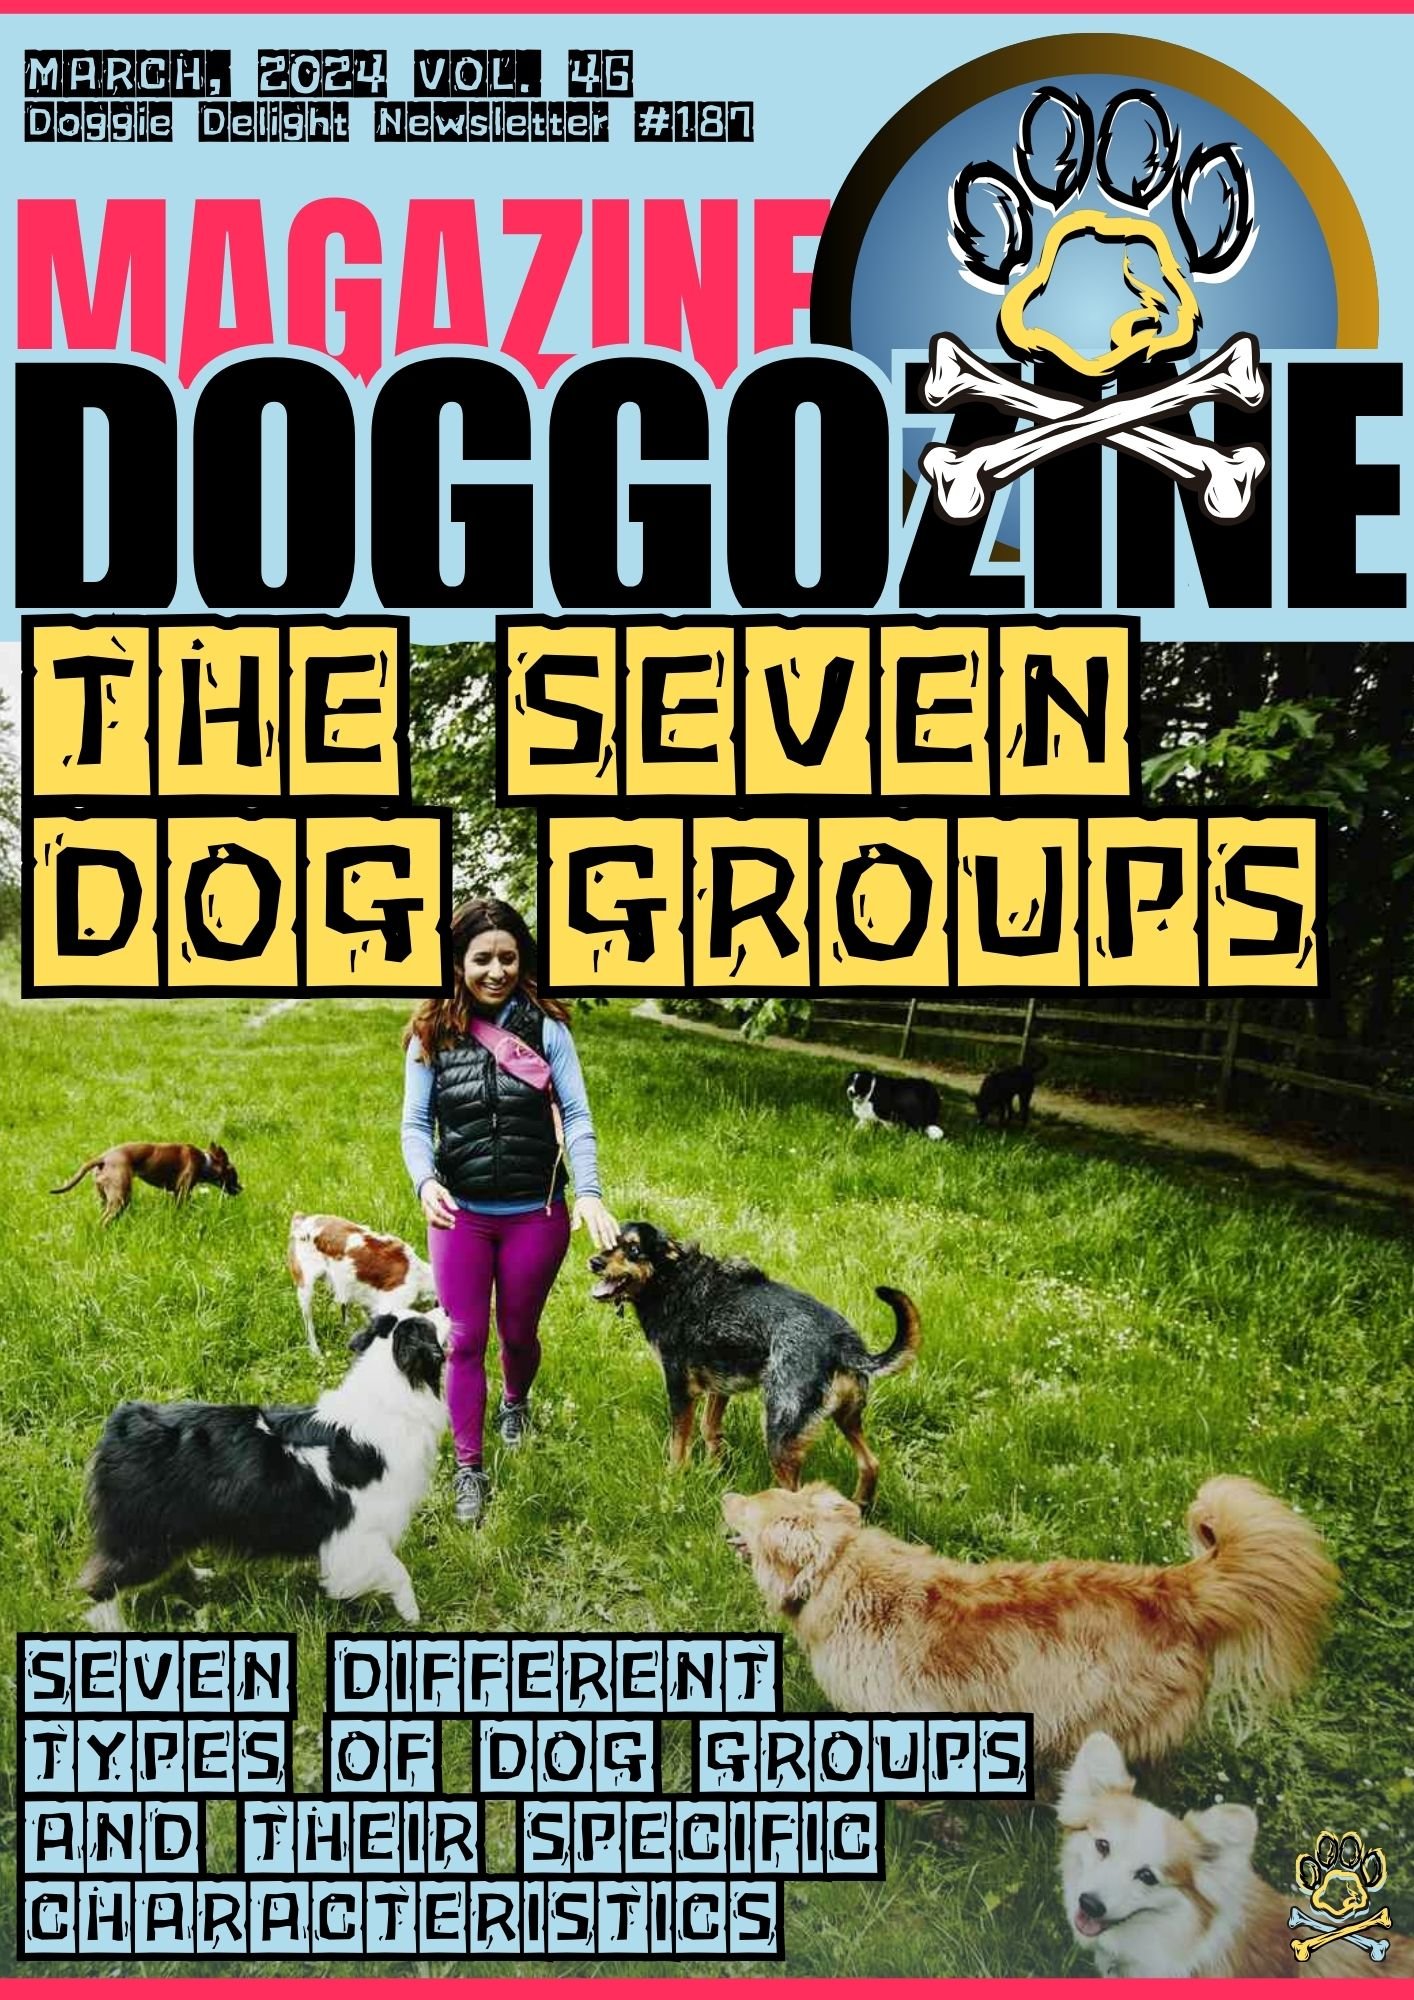 THE SEVEN DOG GROUPS